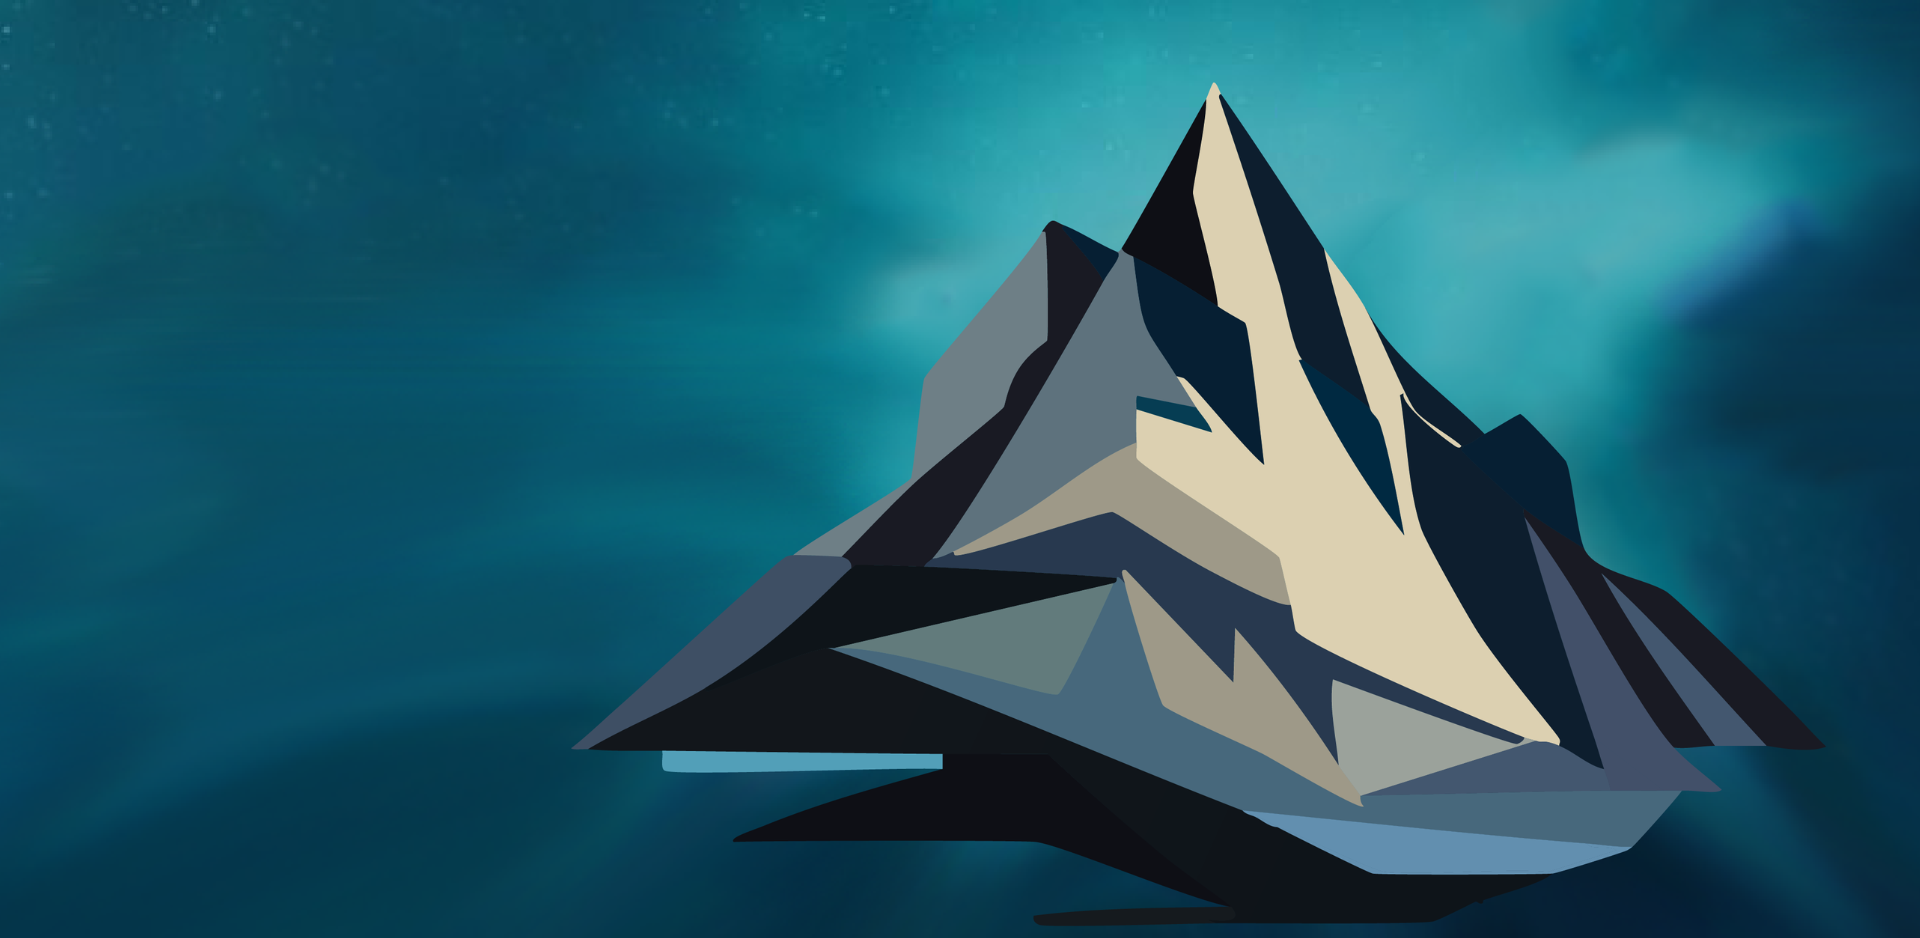 Illustration of a mountain peak against a darker teal background